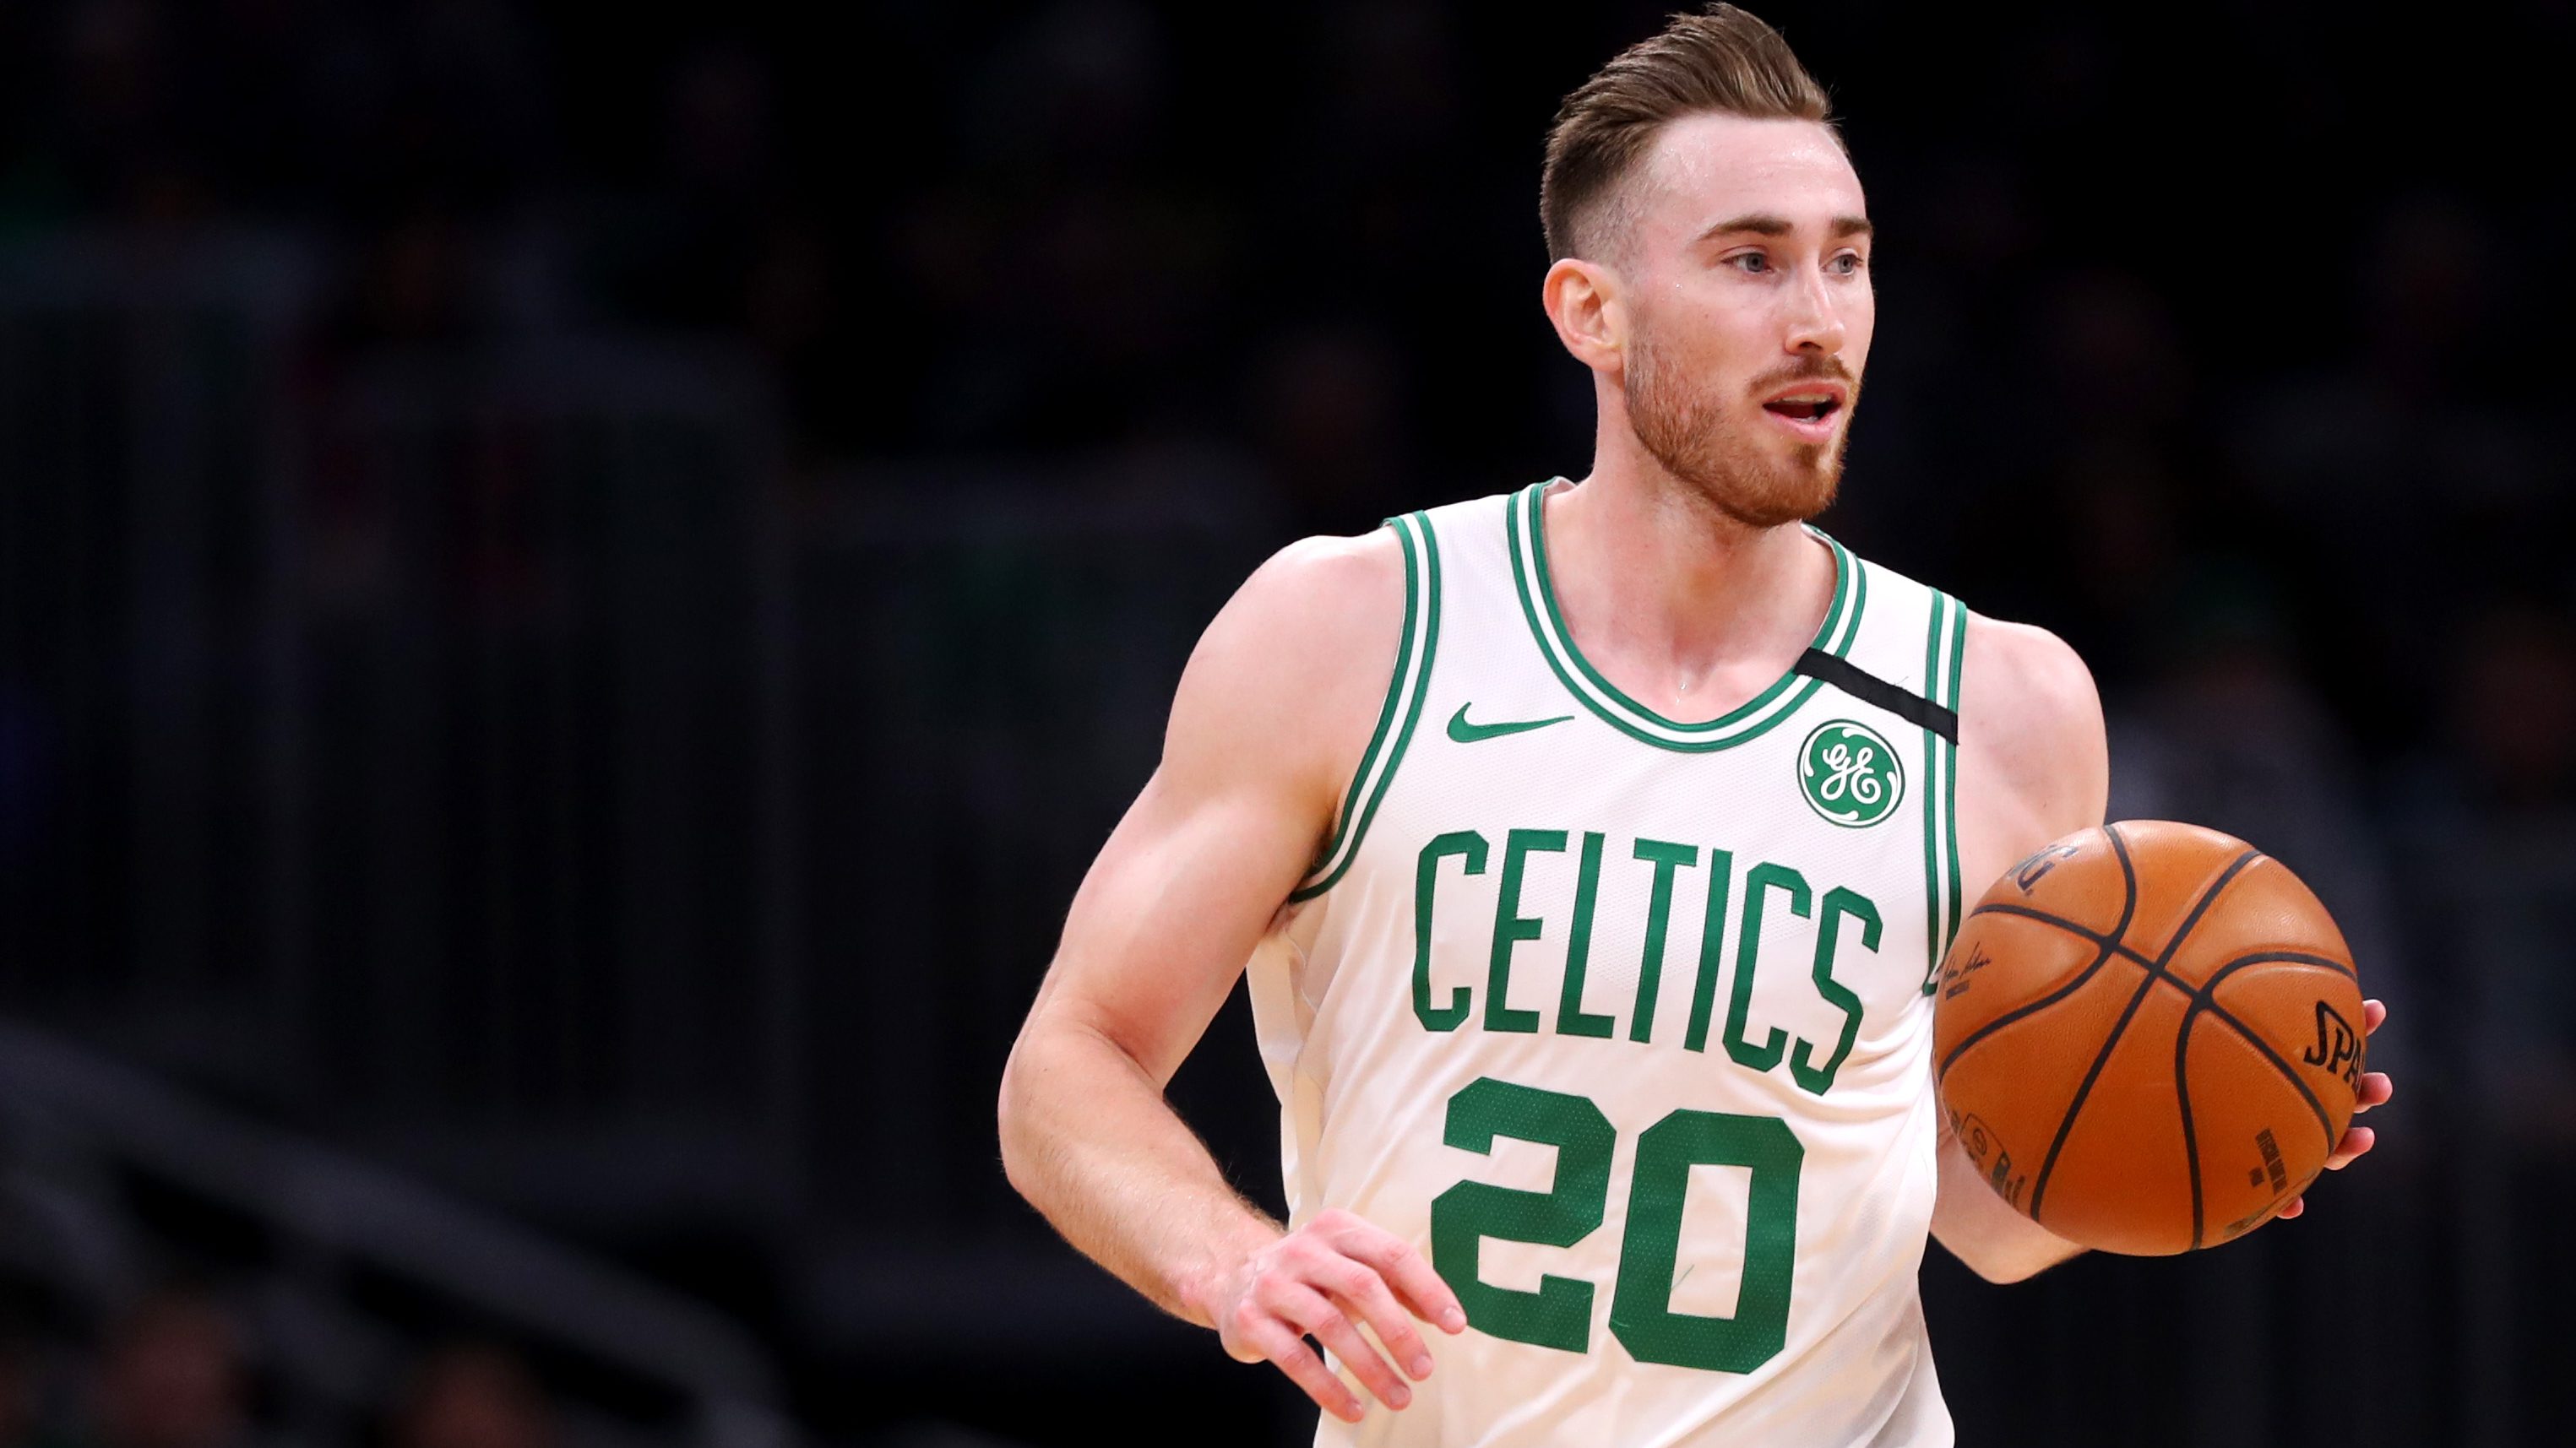 Gordon Hayward opens up about decision to leave Celtics